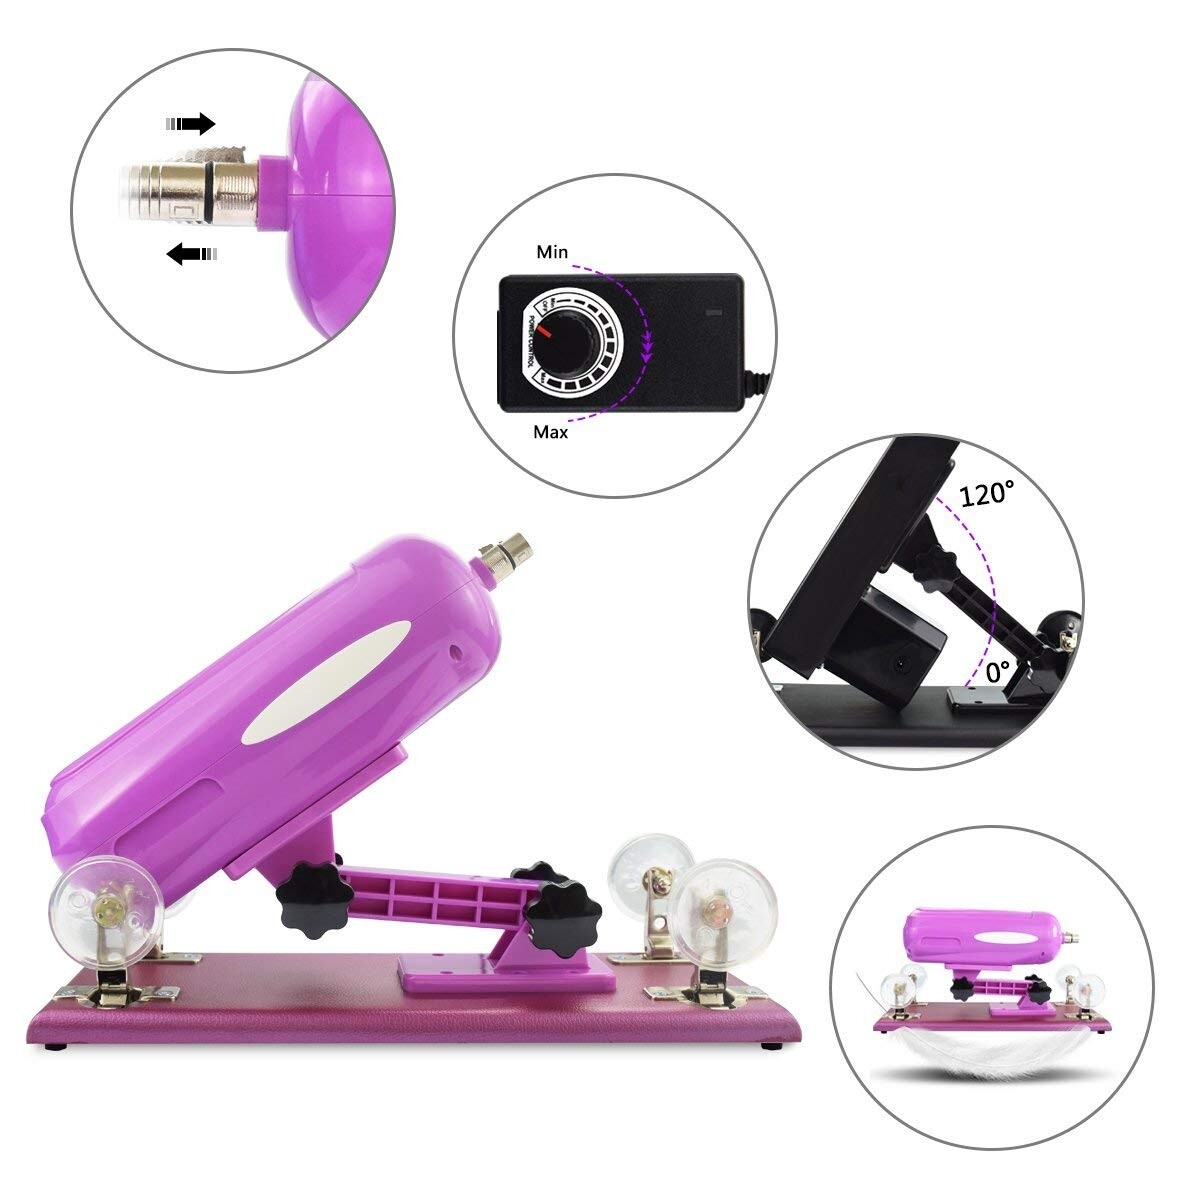 Sex Machine with Dildo Attachments and Vagina Cup Sex Furniture for Men and Women